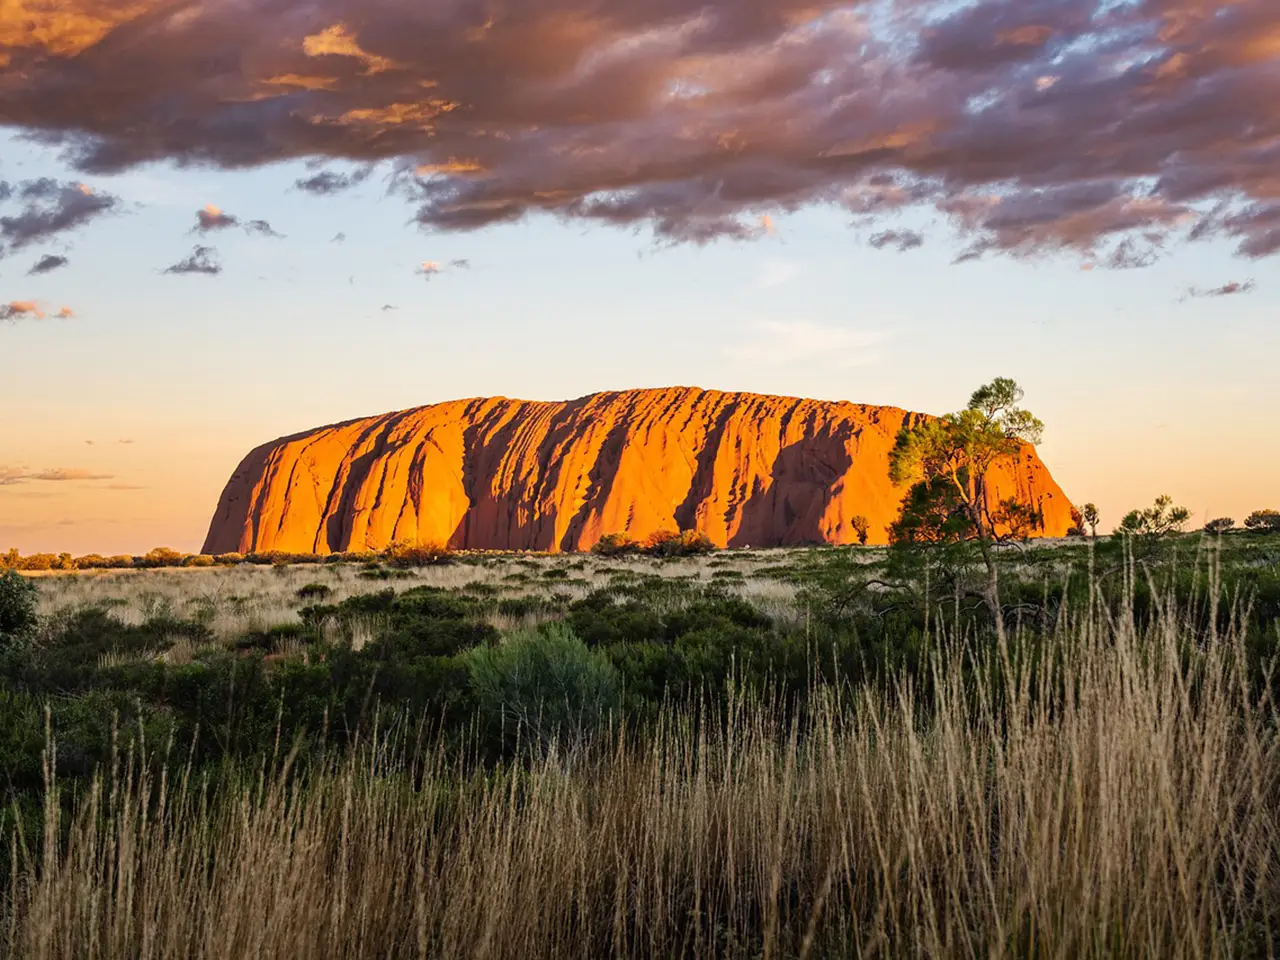 The spectacular red monolith serves as the focal point of Uluru-Kata Tjuta National Park